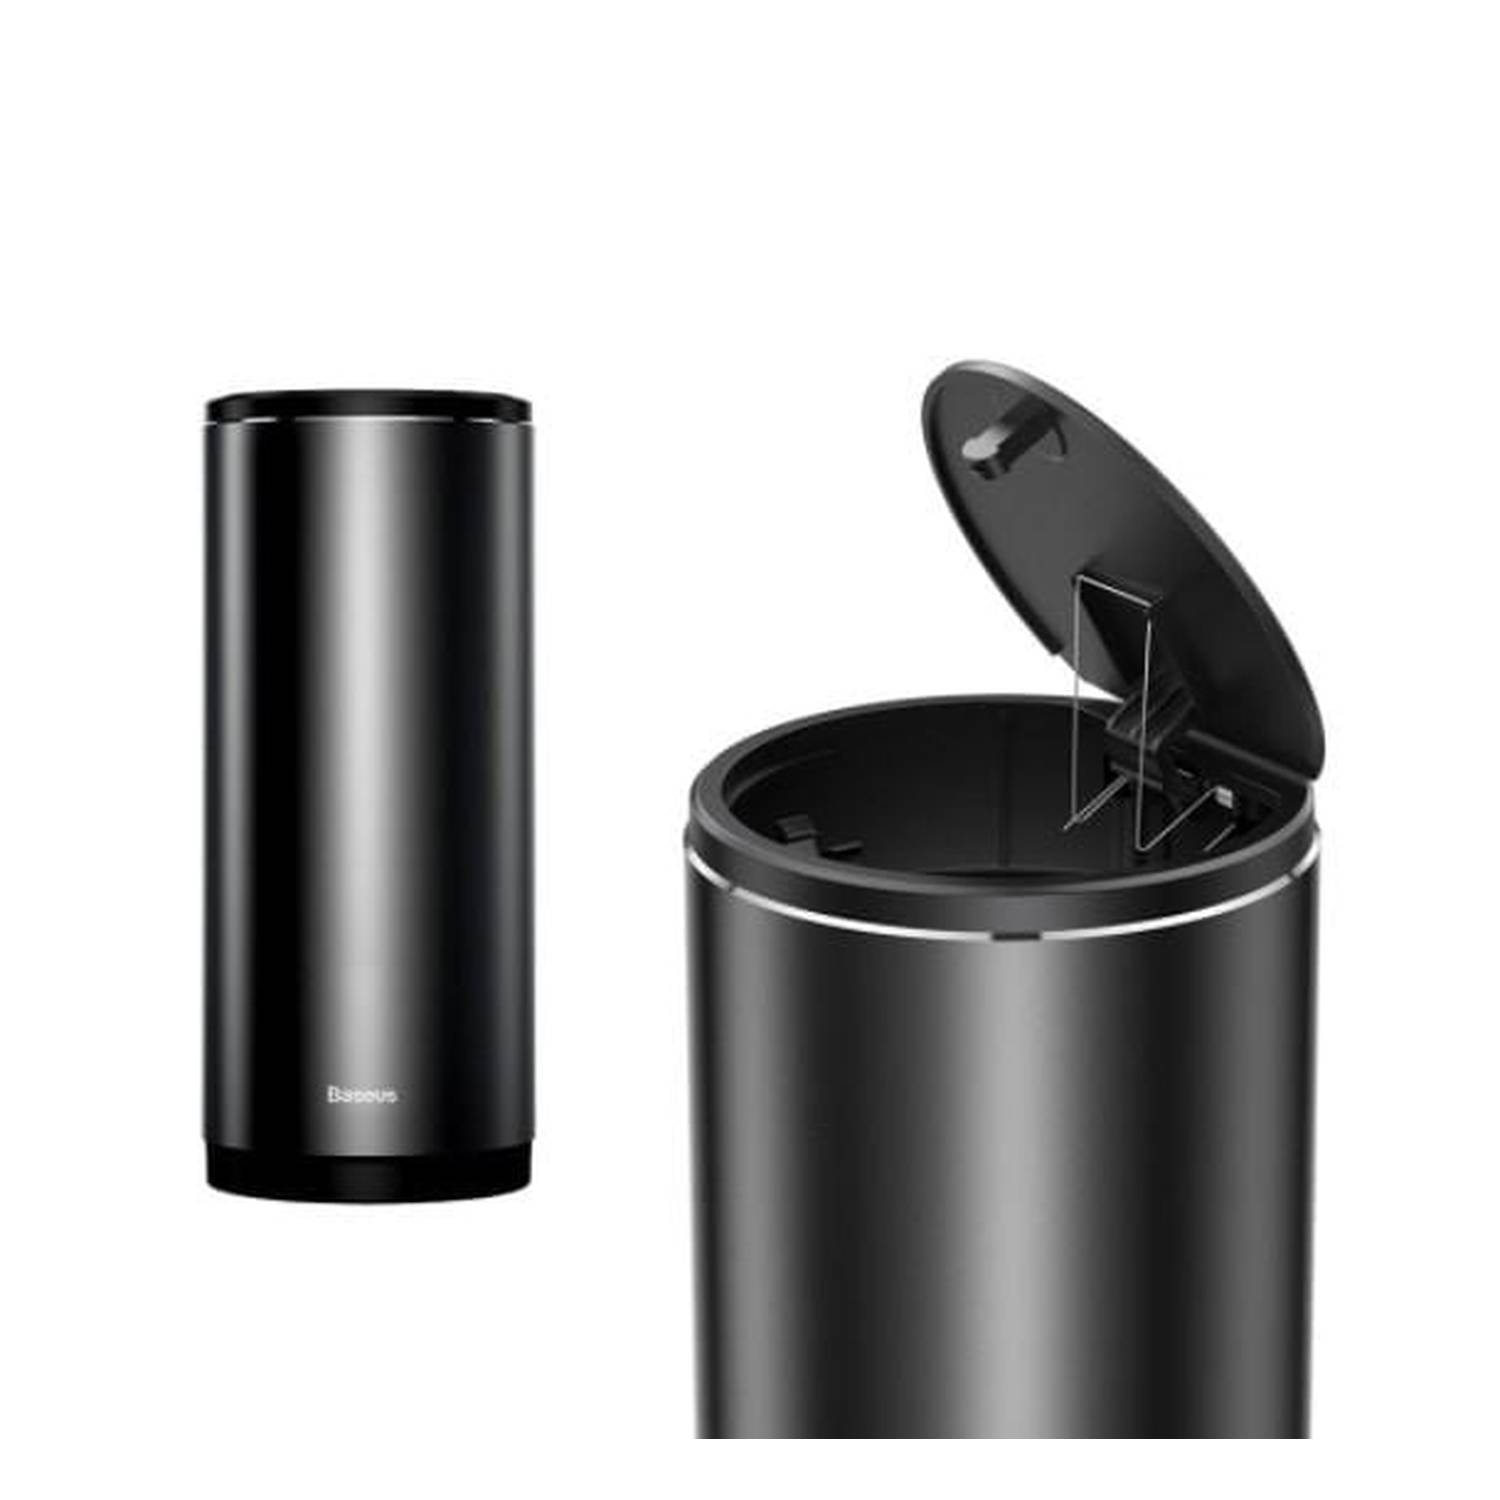 Arqoob - Baseus Gentleman Style Vehicle-mounted Trash Can 500ml Aluminum  Alloy Office Desktops Waste Bin Rubbish Container With 30 Special Trash Bags